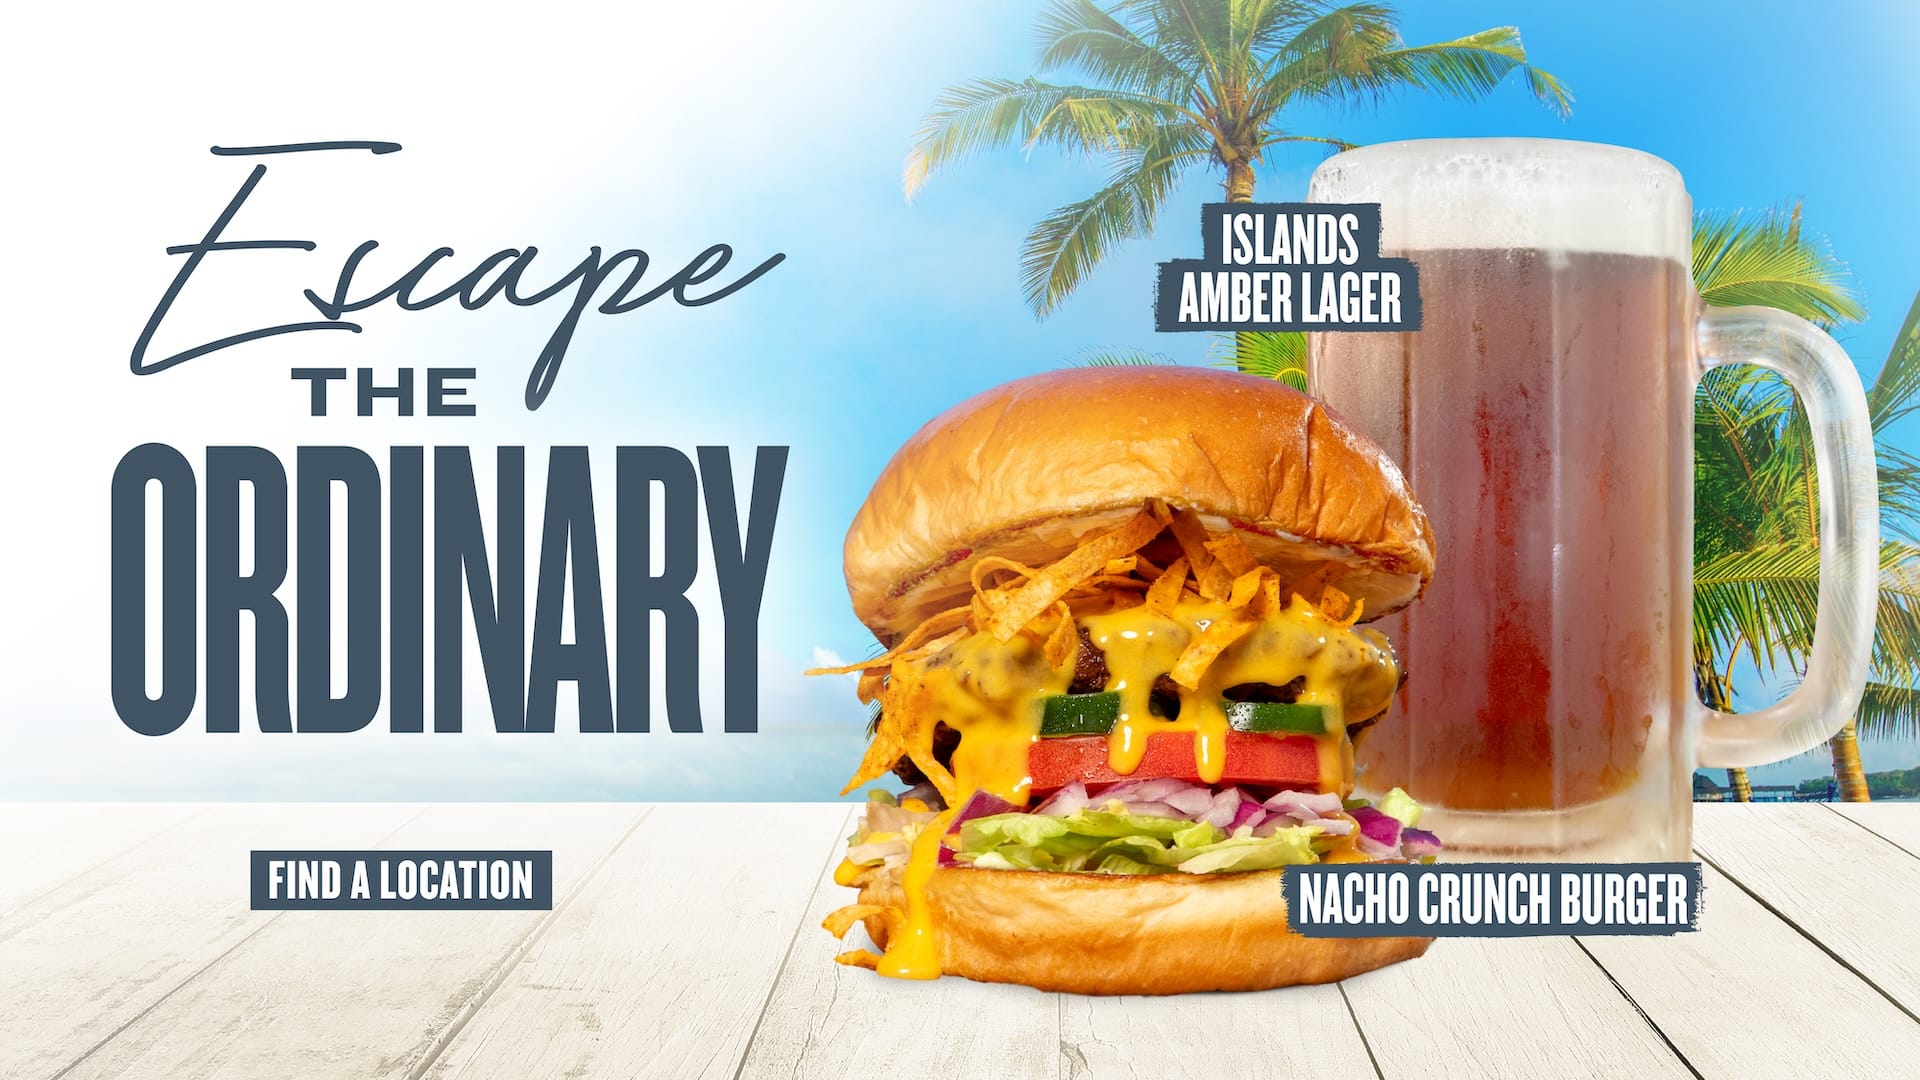 Escape the ordinary - Islands Amber Lager - Find a Location - Nacho Crunch Burger